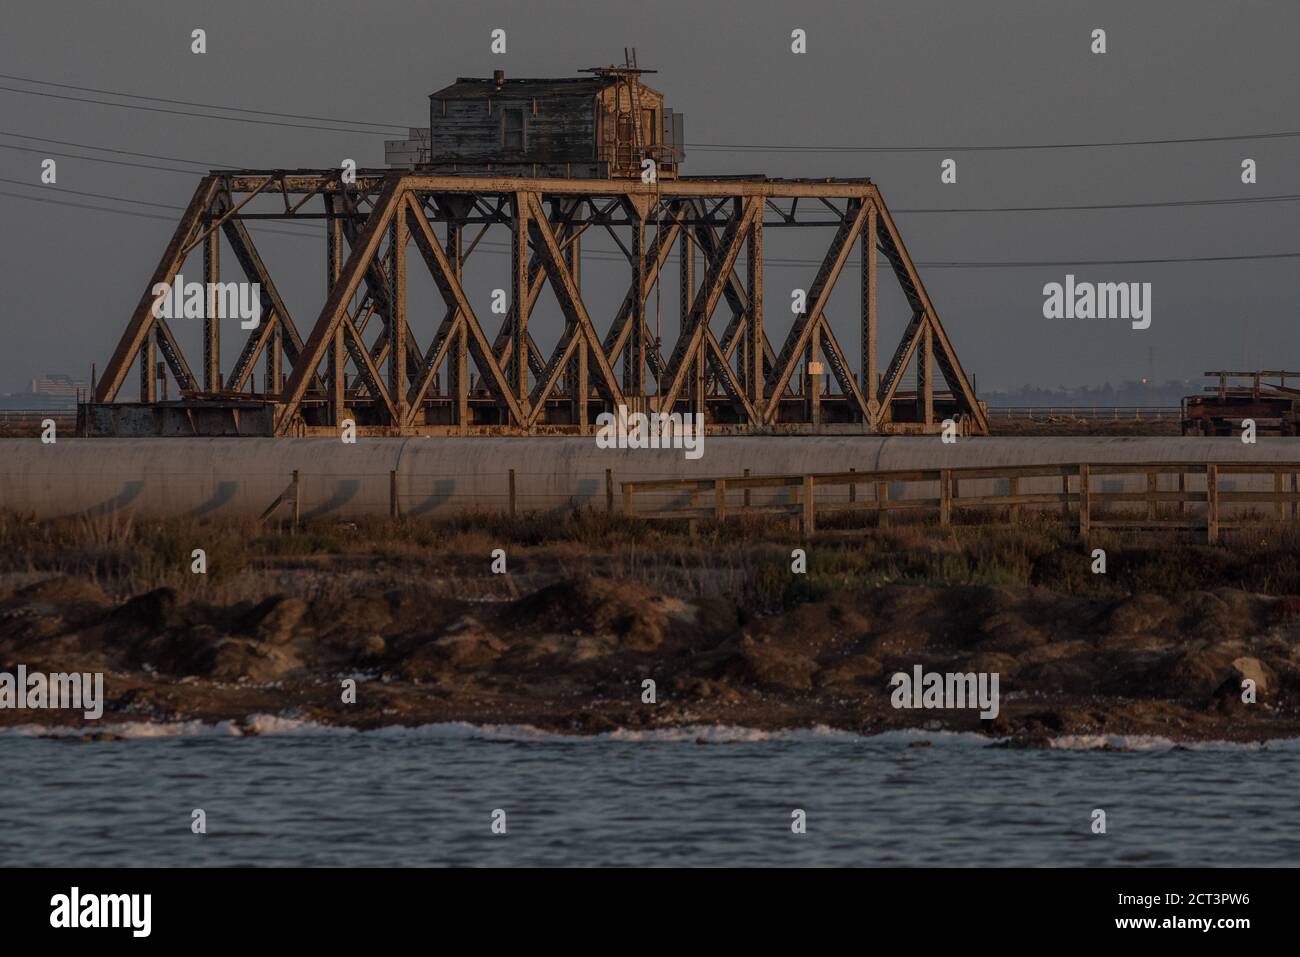 The Dunbarton rail bridge stands decommissioned and out of use, it used to be a railroad bridge across the San francisco bay. Stock Photo